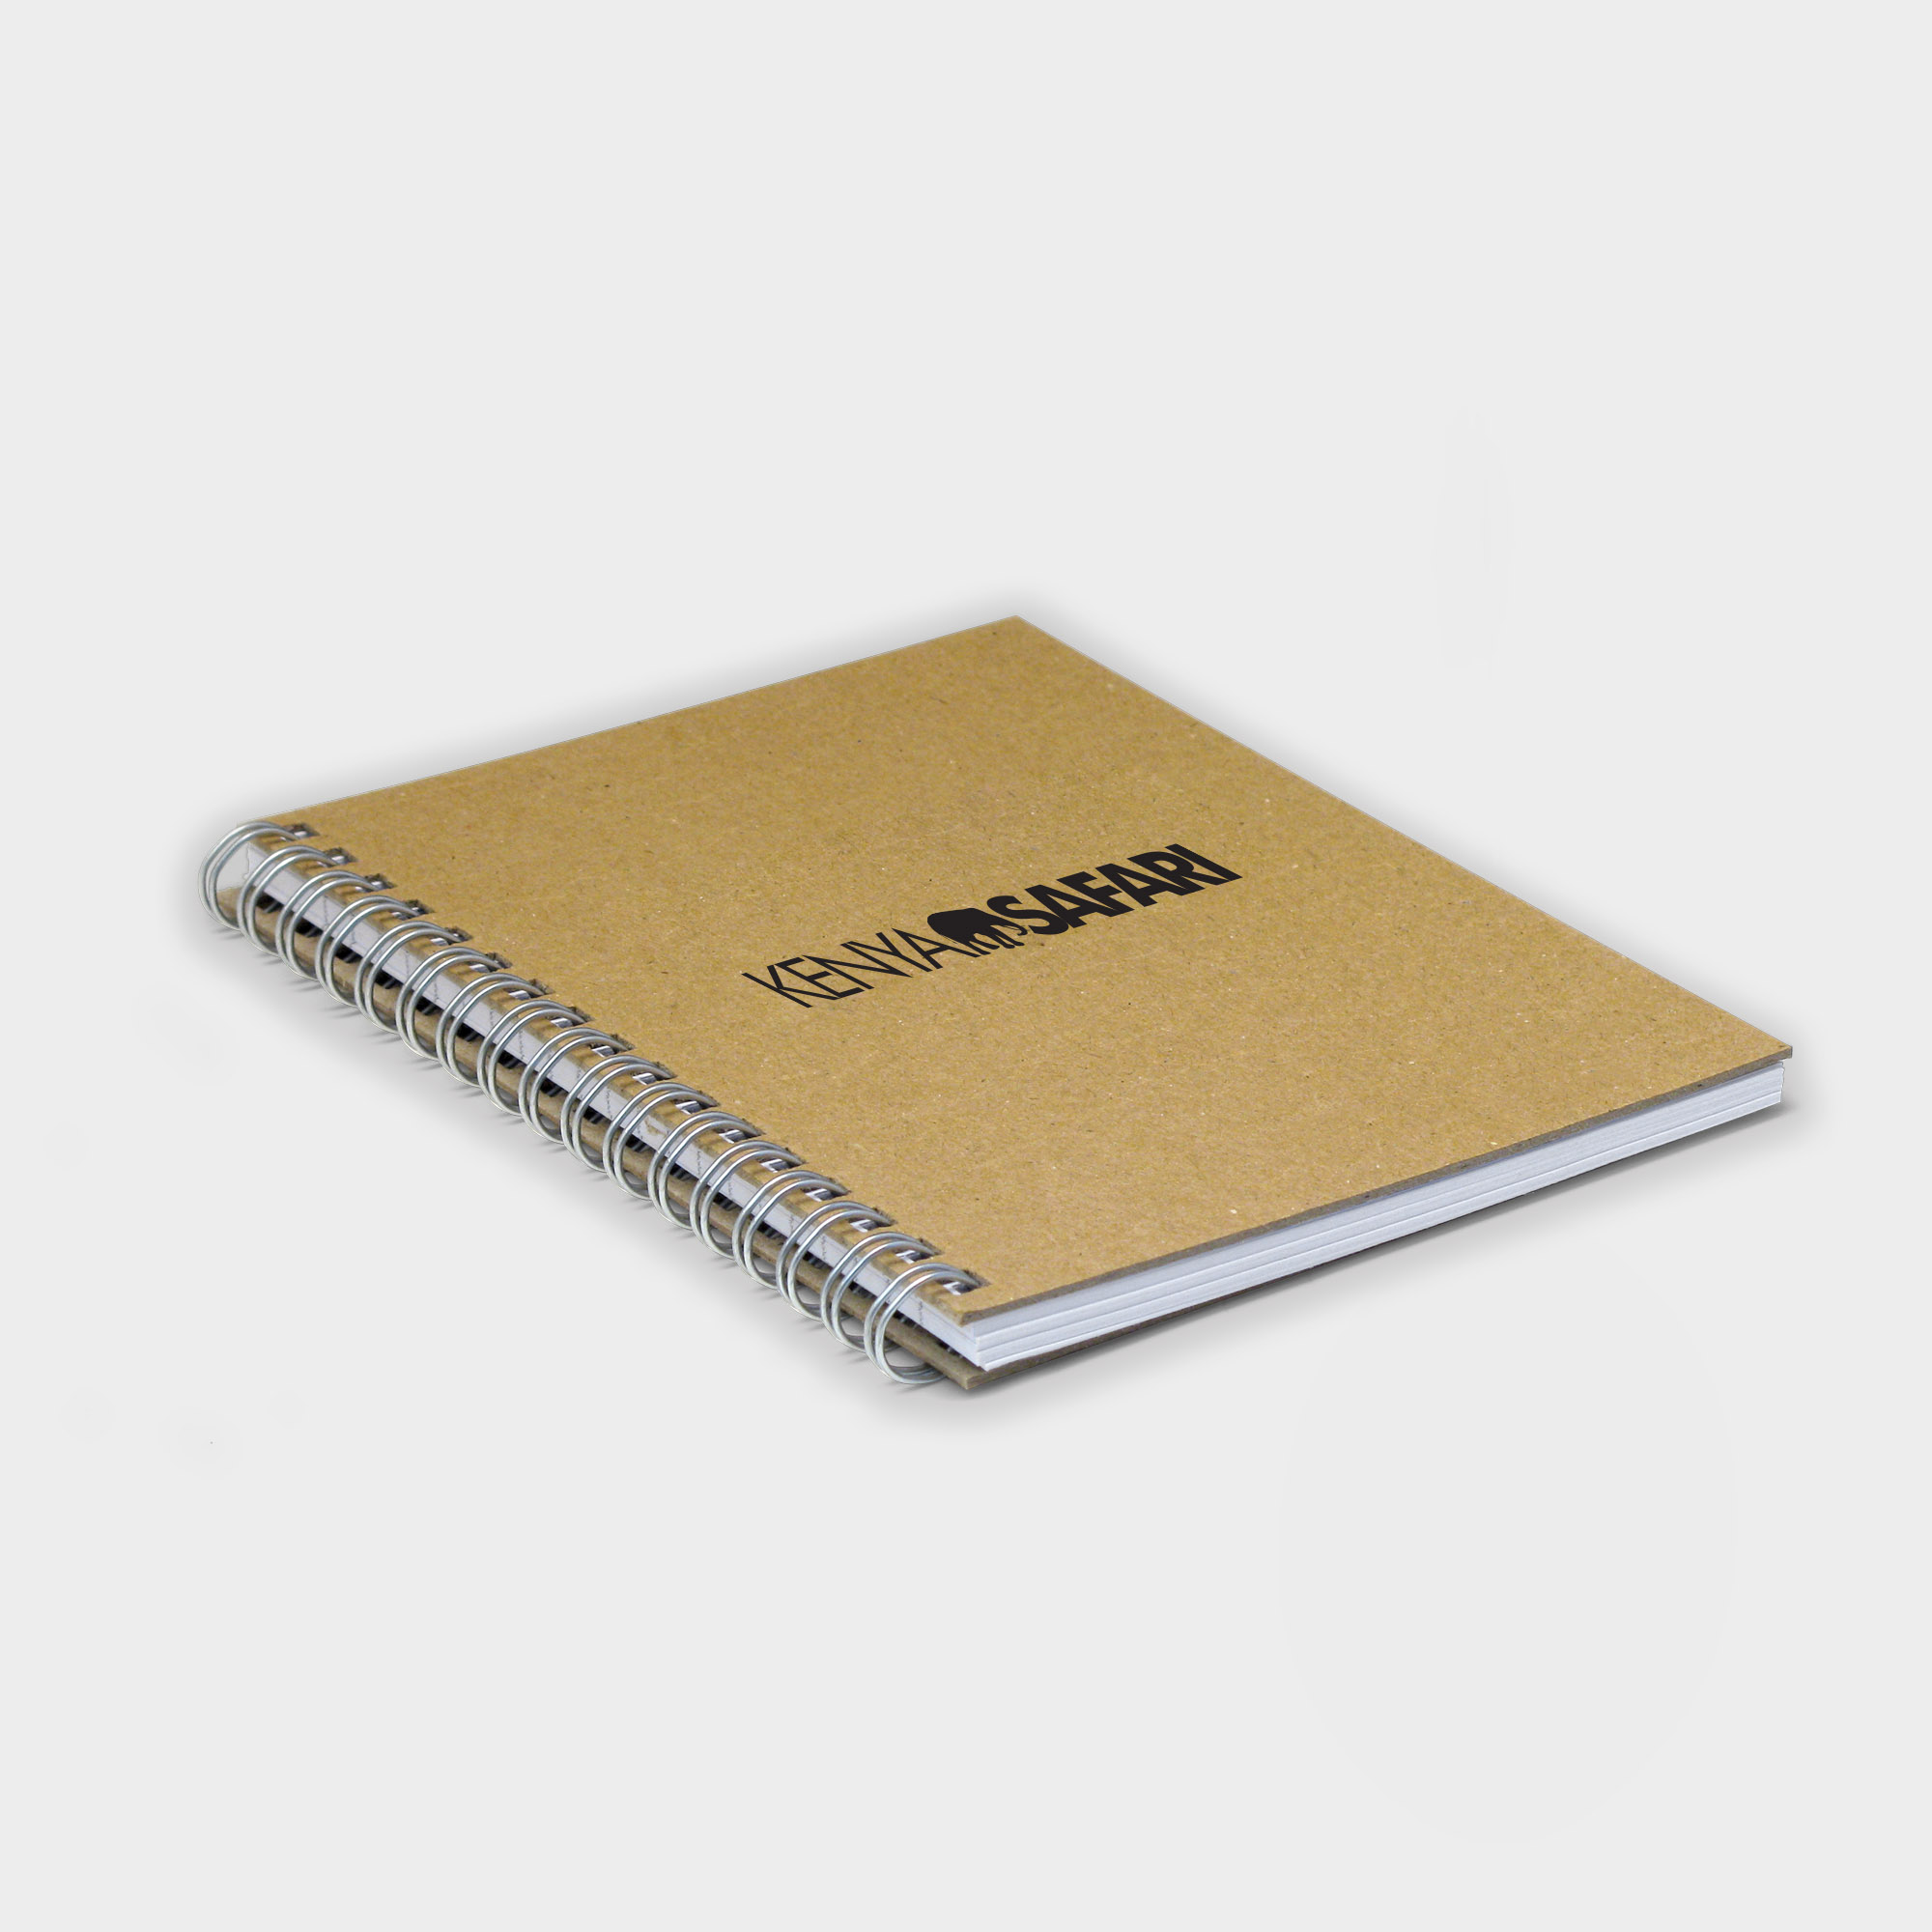 The Green & Good Wirebound Notebook is made from recycled paper - size A6. The front and back cover is made from recycled cardboard (1200 microns), the sheets are 80gsm. Comes wirebound with 50 sheets as standard. Please contact us if you require a bespoke number of sheets.